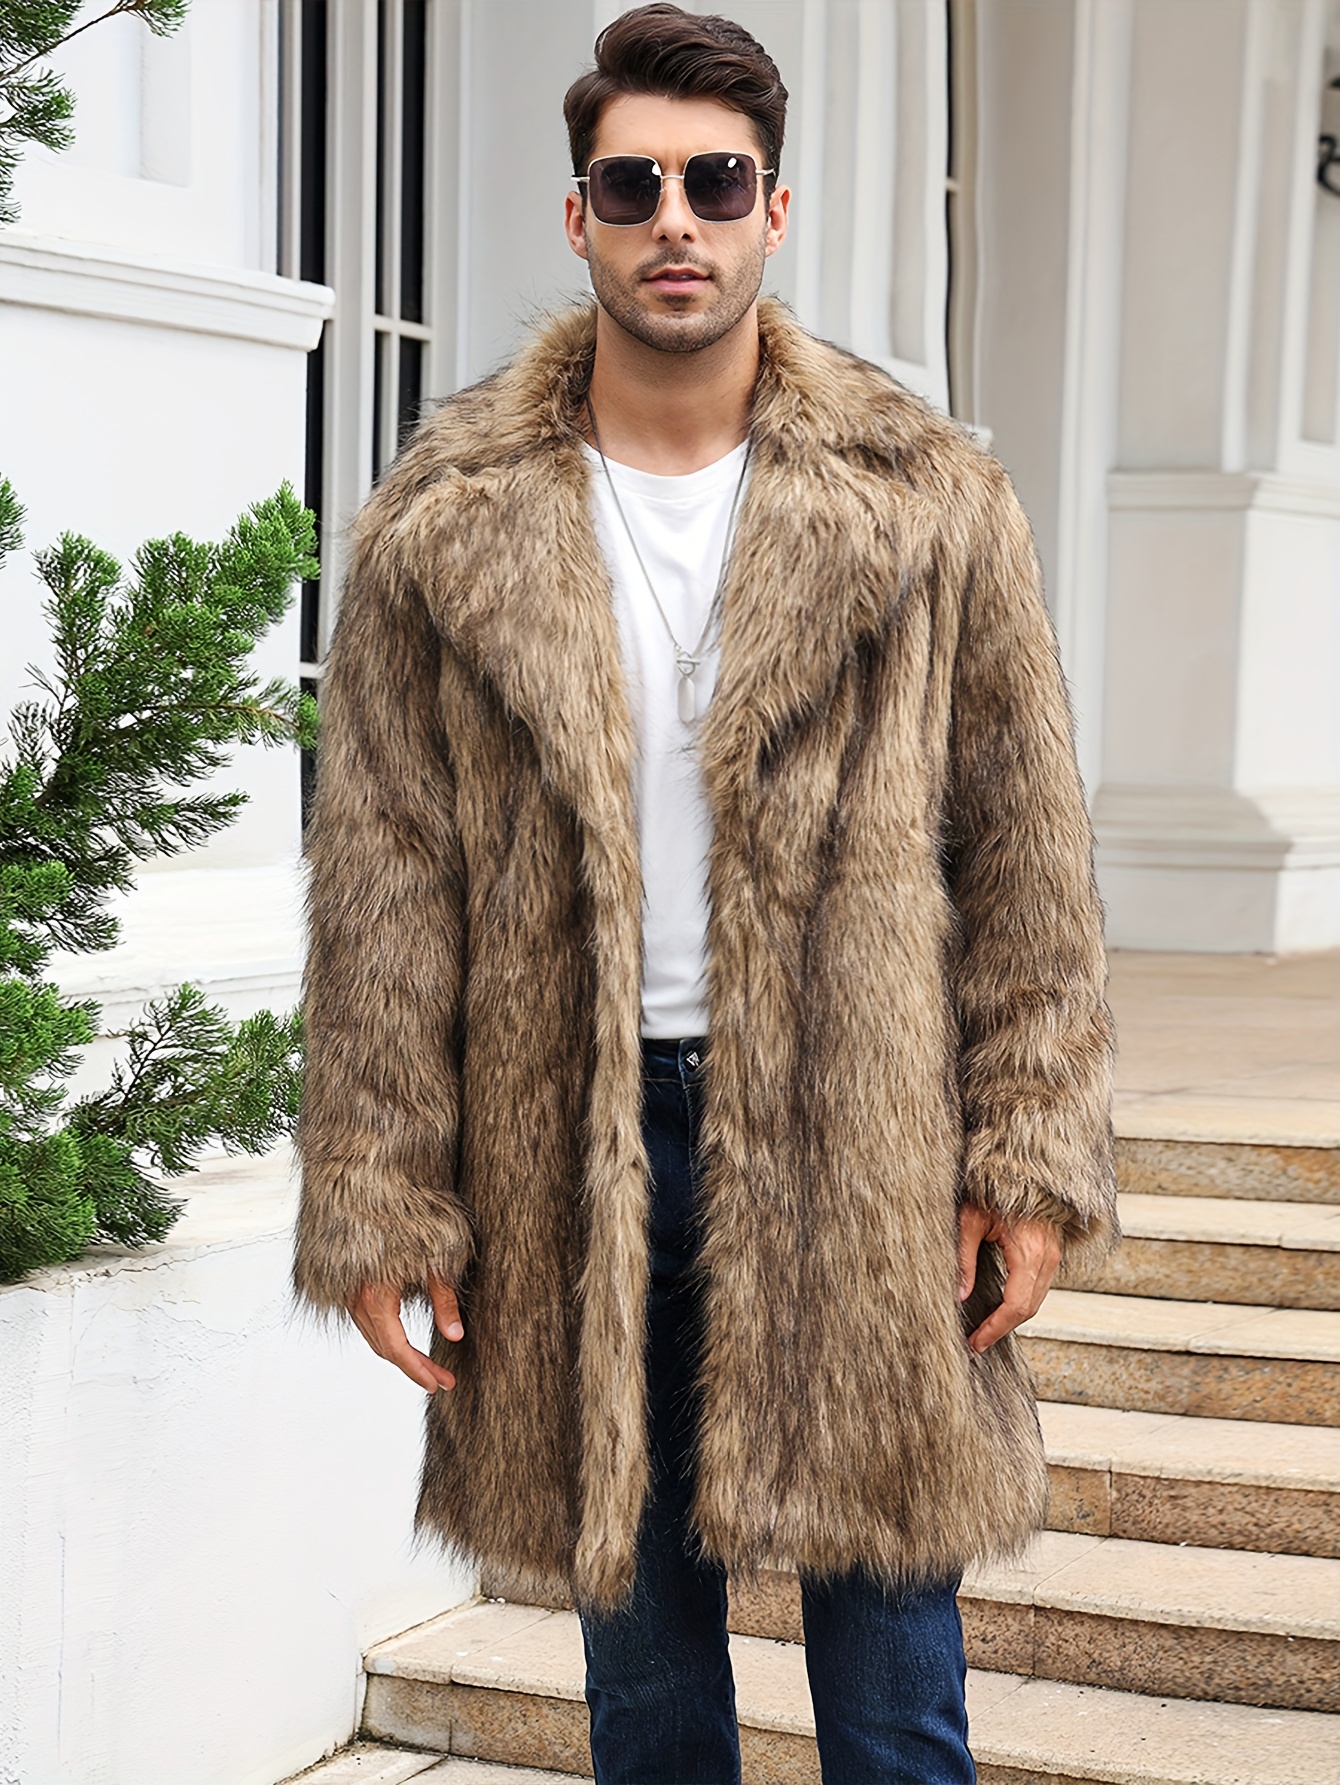 Buy Tanming Men's Winter Warm Faux Fur Lined Coat with Detachable